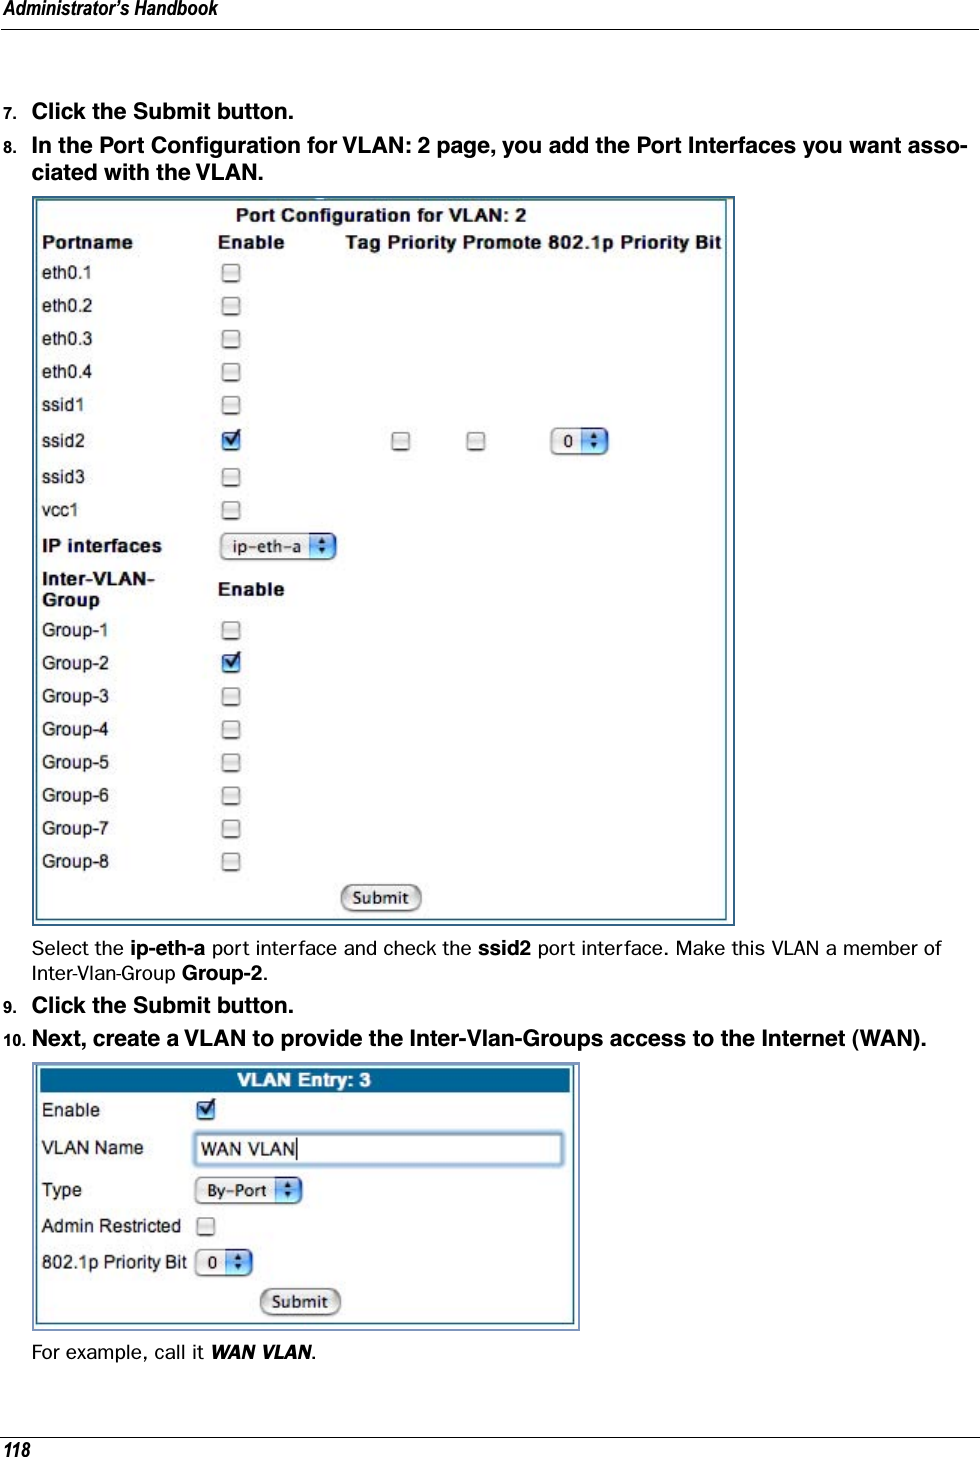 Administrator’s Handbook1187. Click the Submit button.8. In the Port Conﬁguration for VLAN: 2 page, you add the Port Interfaces you want asso-ciated with the VLAN.Select the ip-eth-a port interface and check the ssid2 port interface. Make this VLAN a member of Inter-Vlan-Group Group-2.9. Click the Submit button.10. Next, create a VLAN to provide the Inter-Vlan-Groups access to the Internet (WAN).For example, call it WAN VLAN.